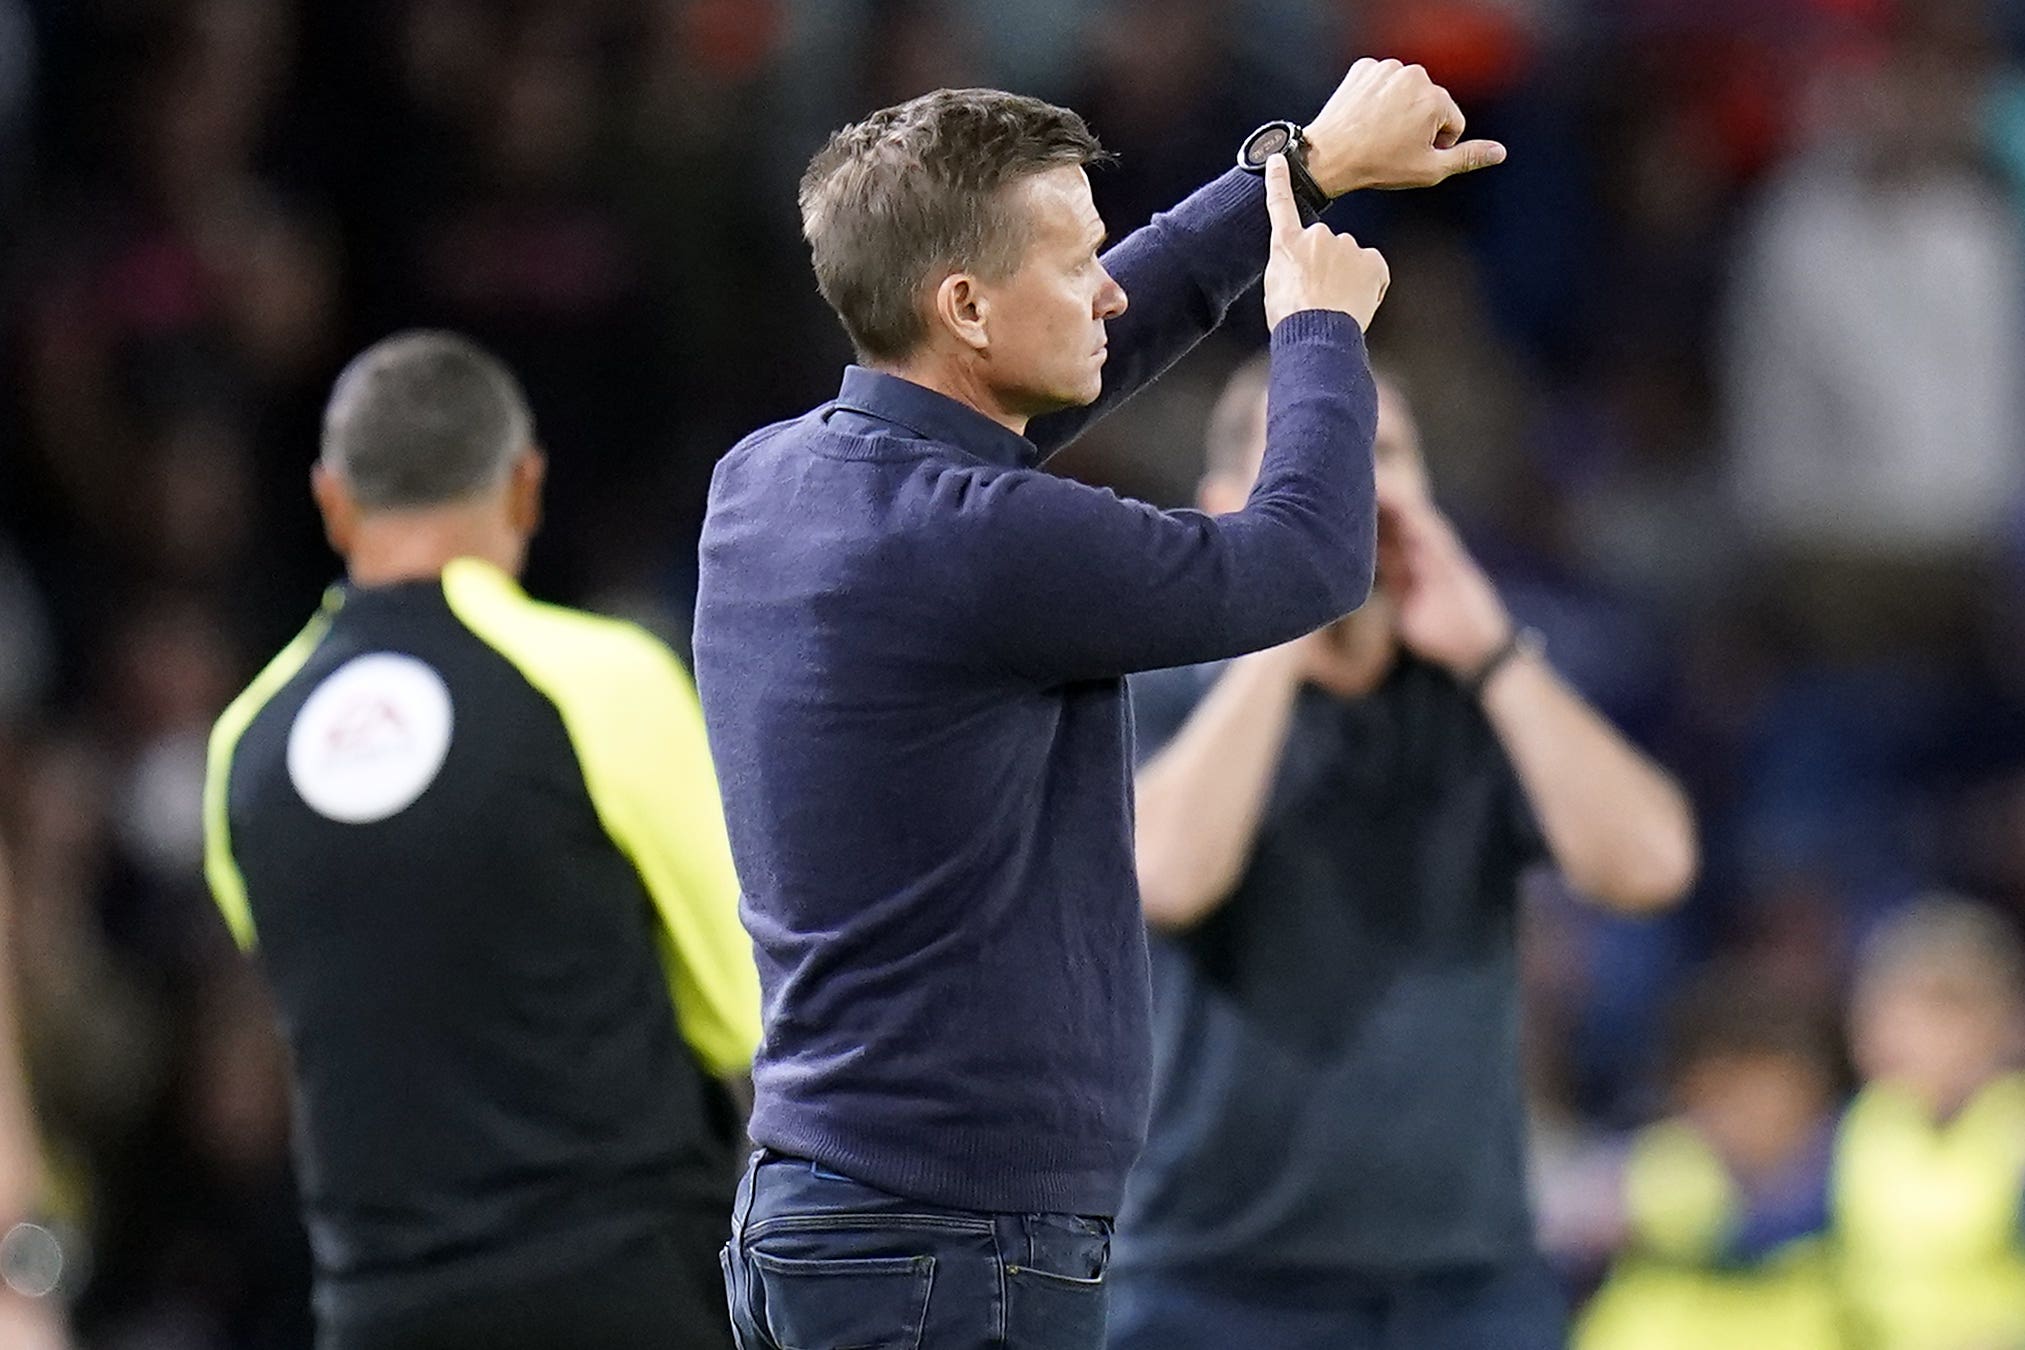 Leeds coach Jesse Marsch watched from the stands after his own recent red card